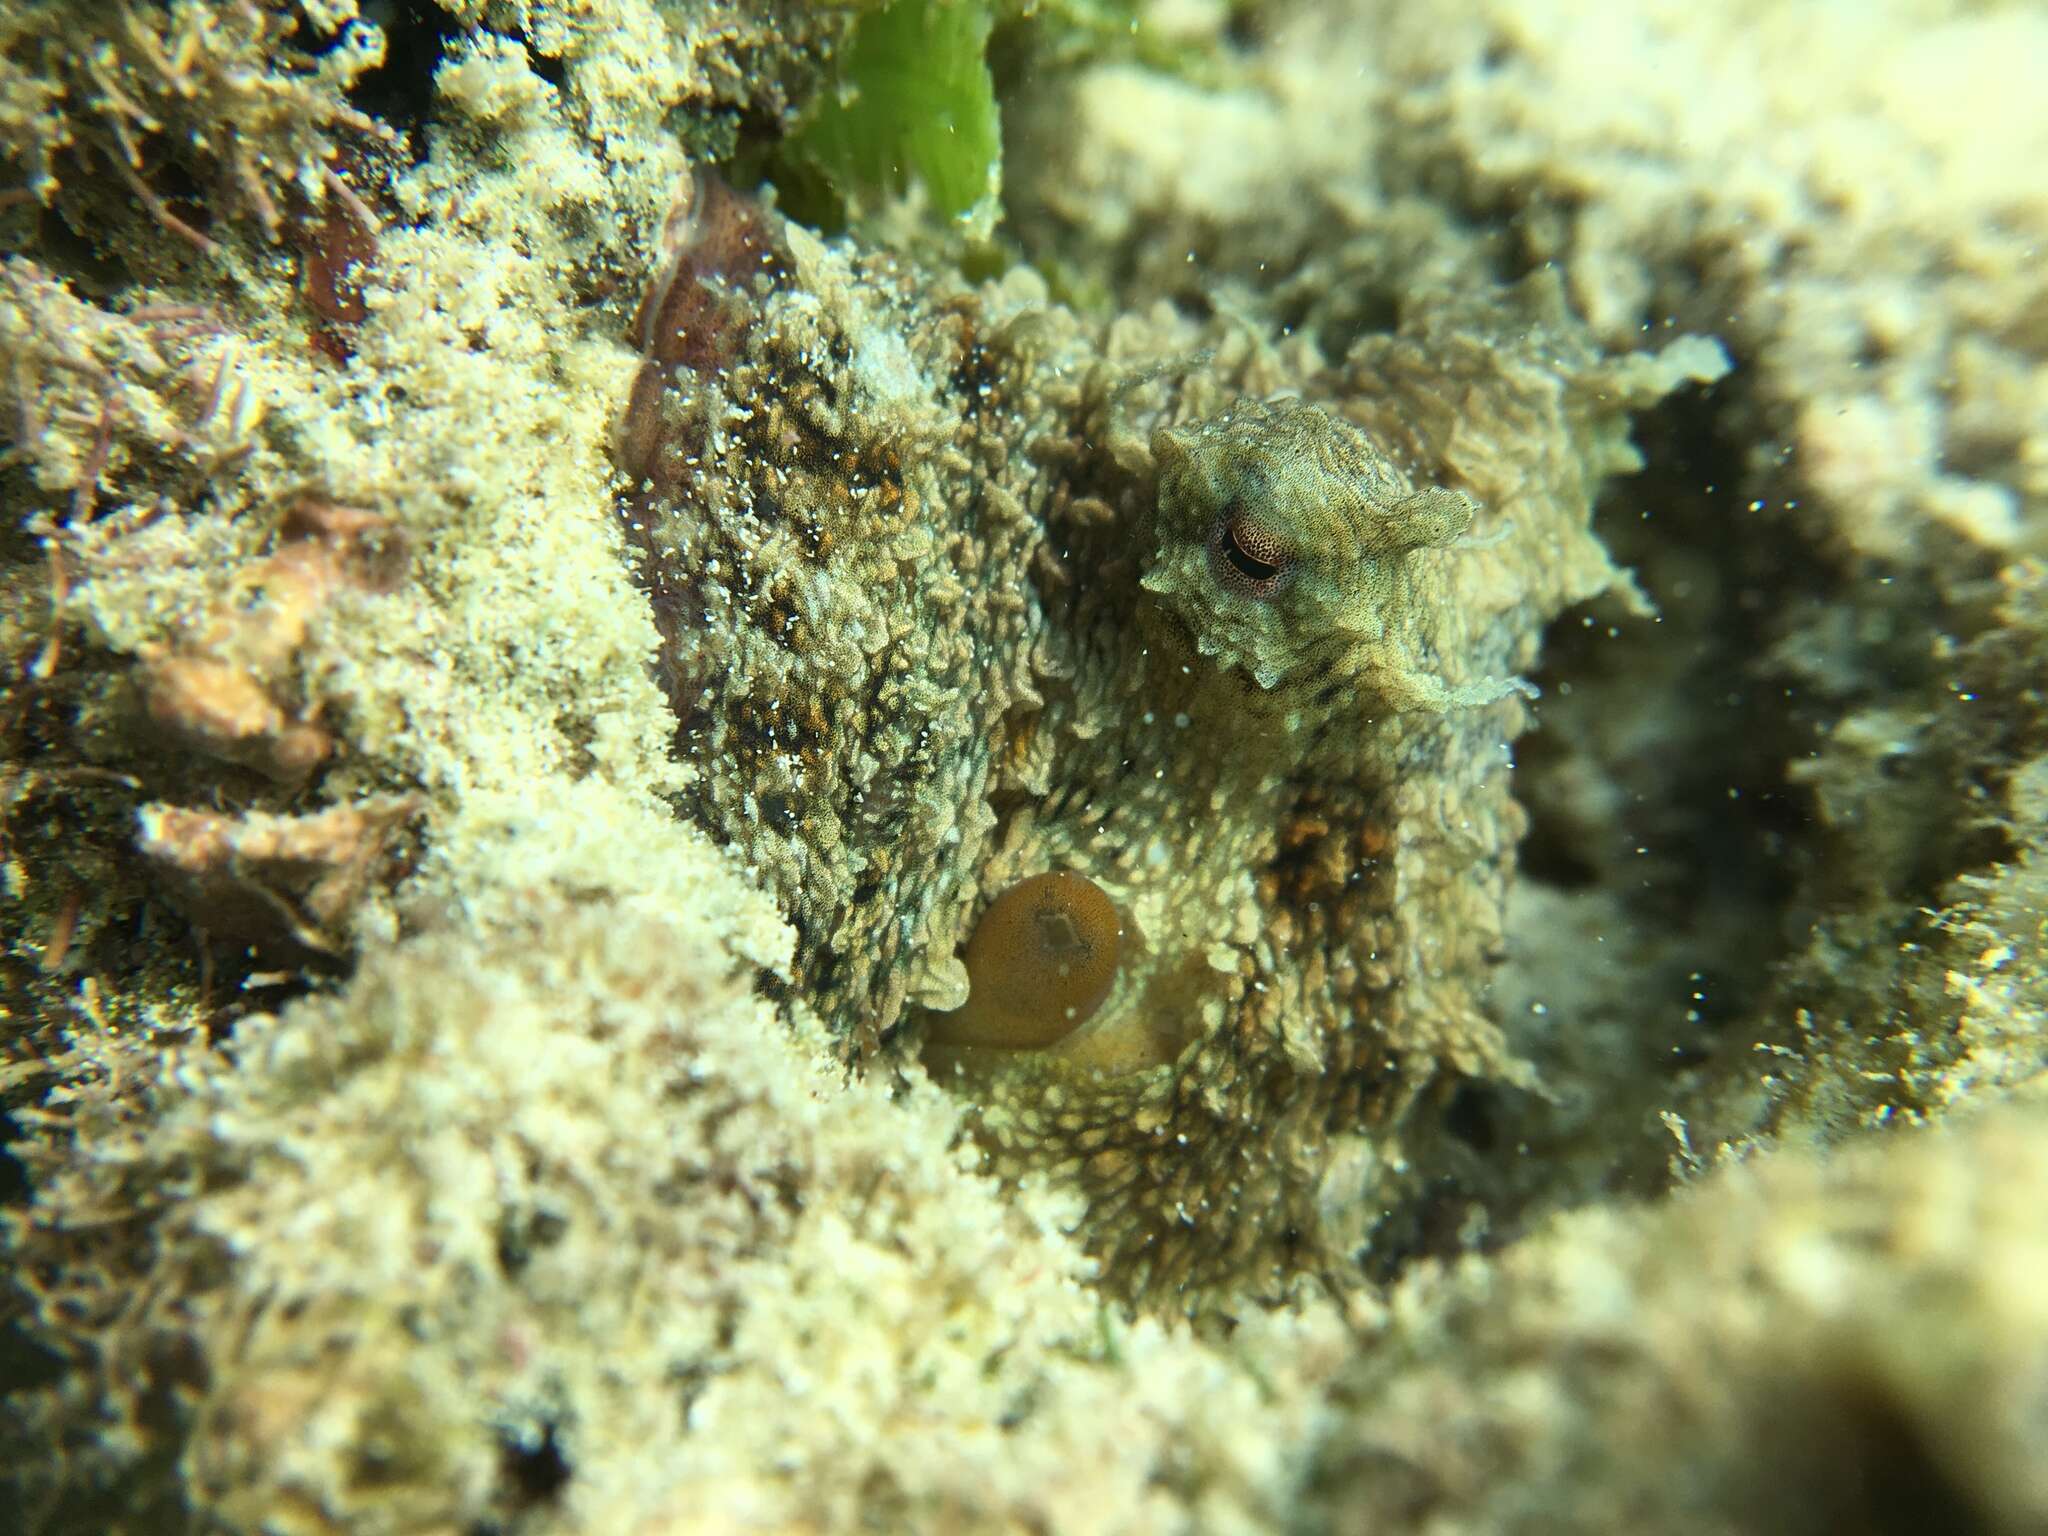 Image of Caribbean two-spot octopus